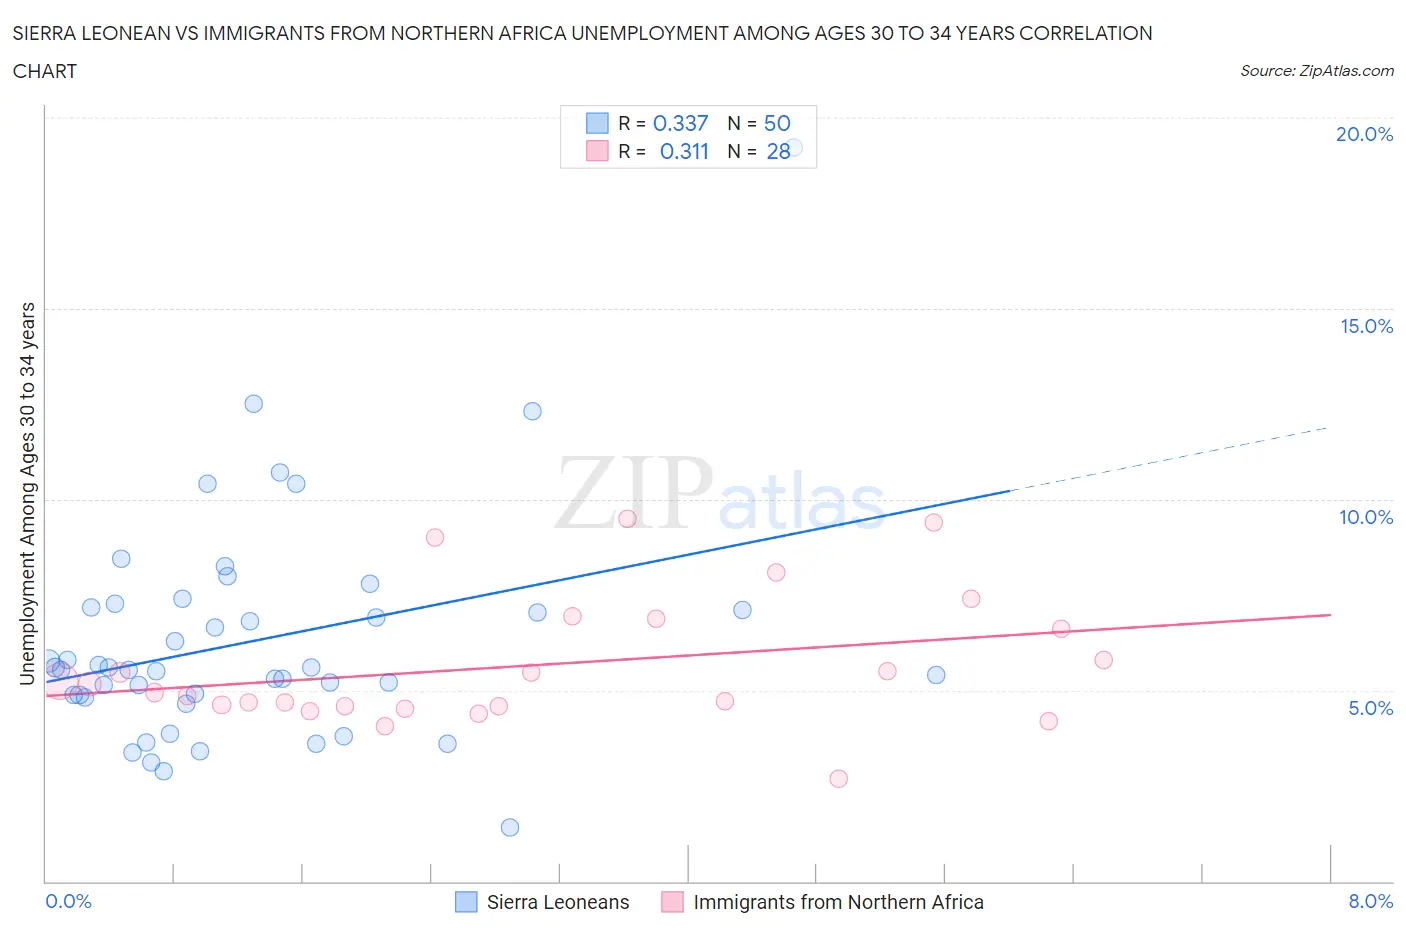 Sierra Leonean vs Immigrants from Northern Africa Unemployment Among Ages 30 to 34 years